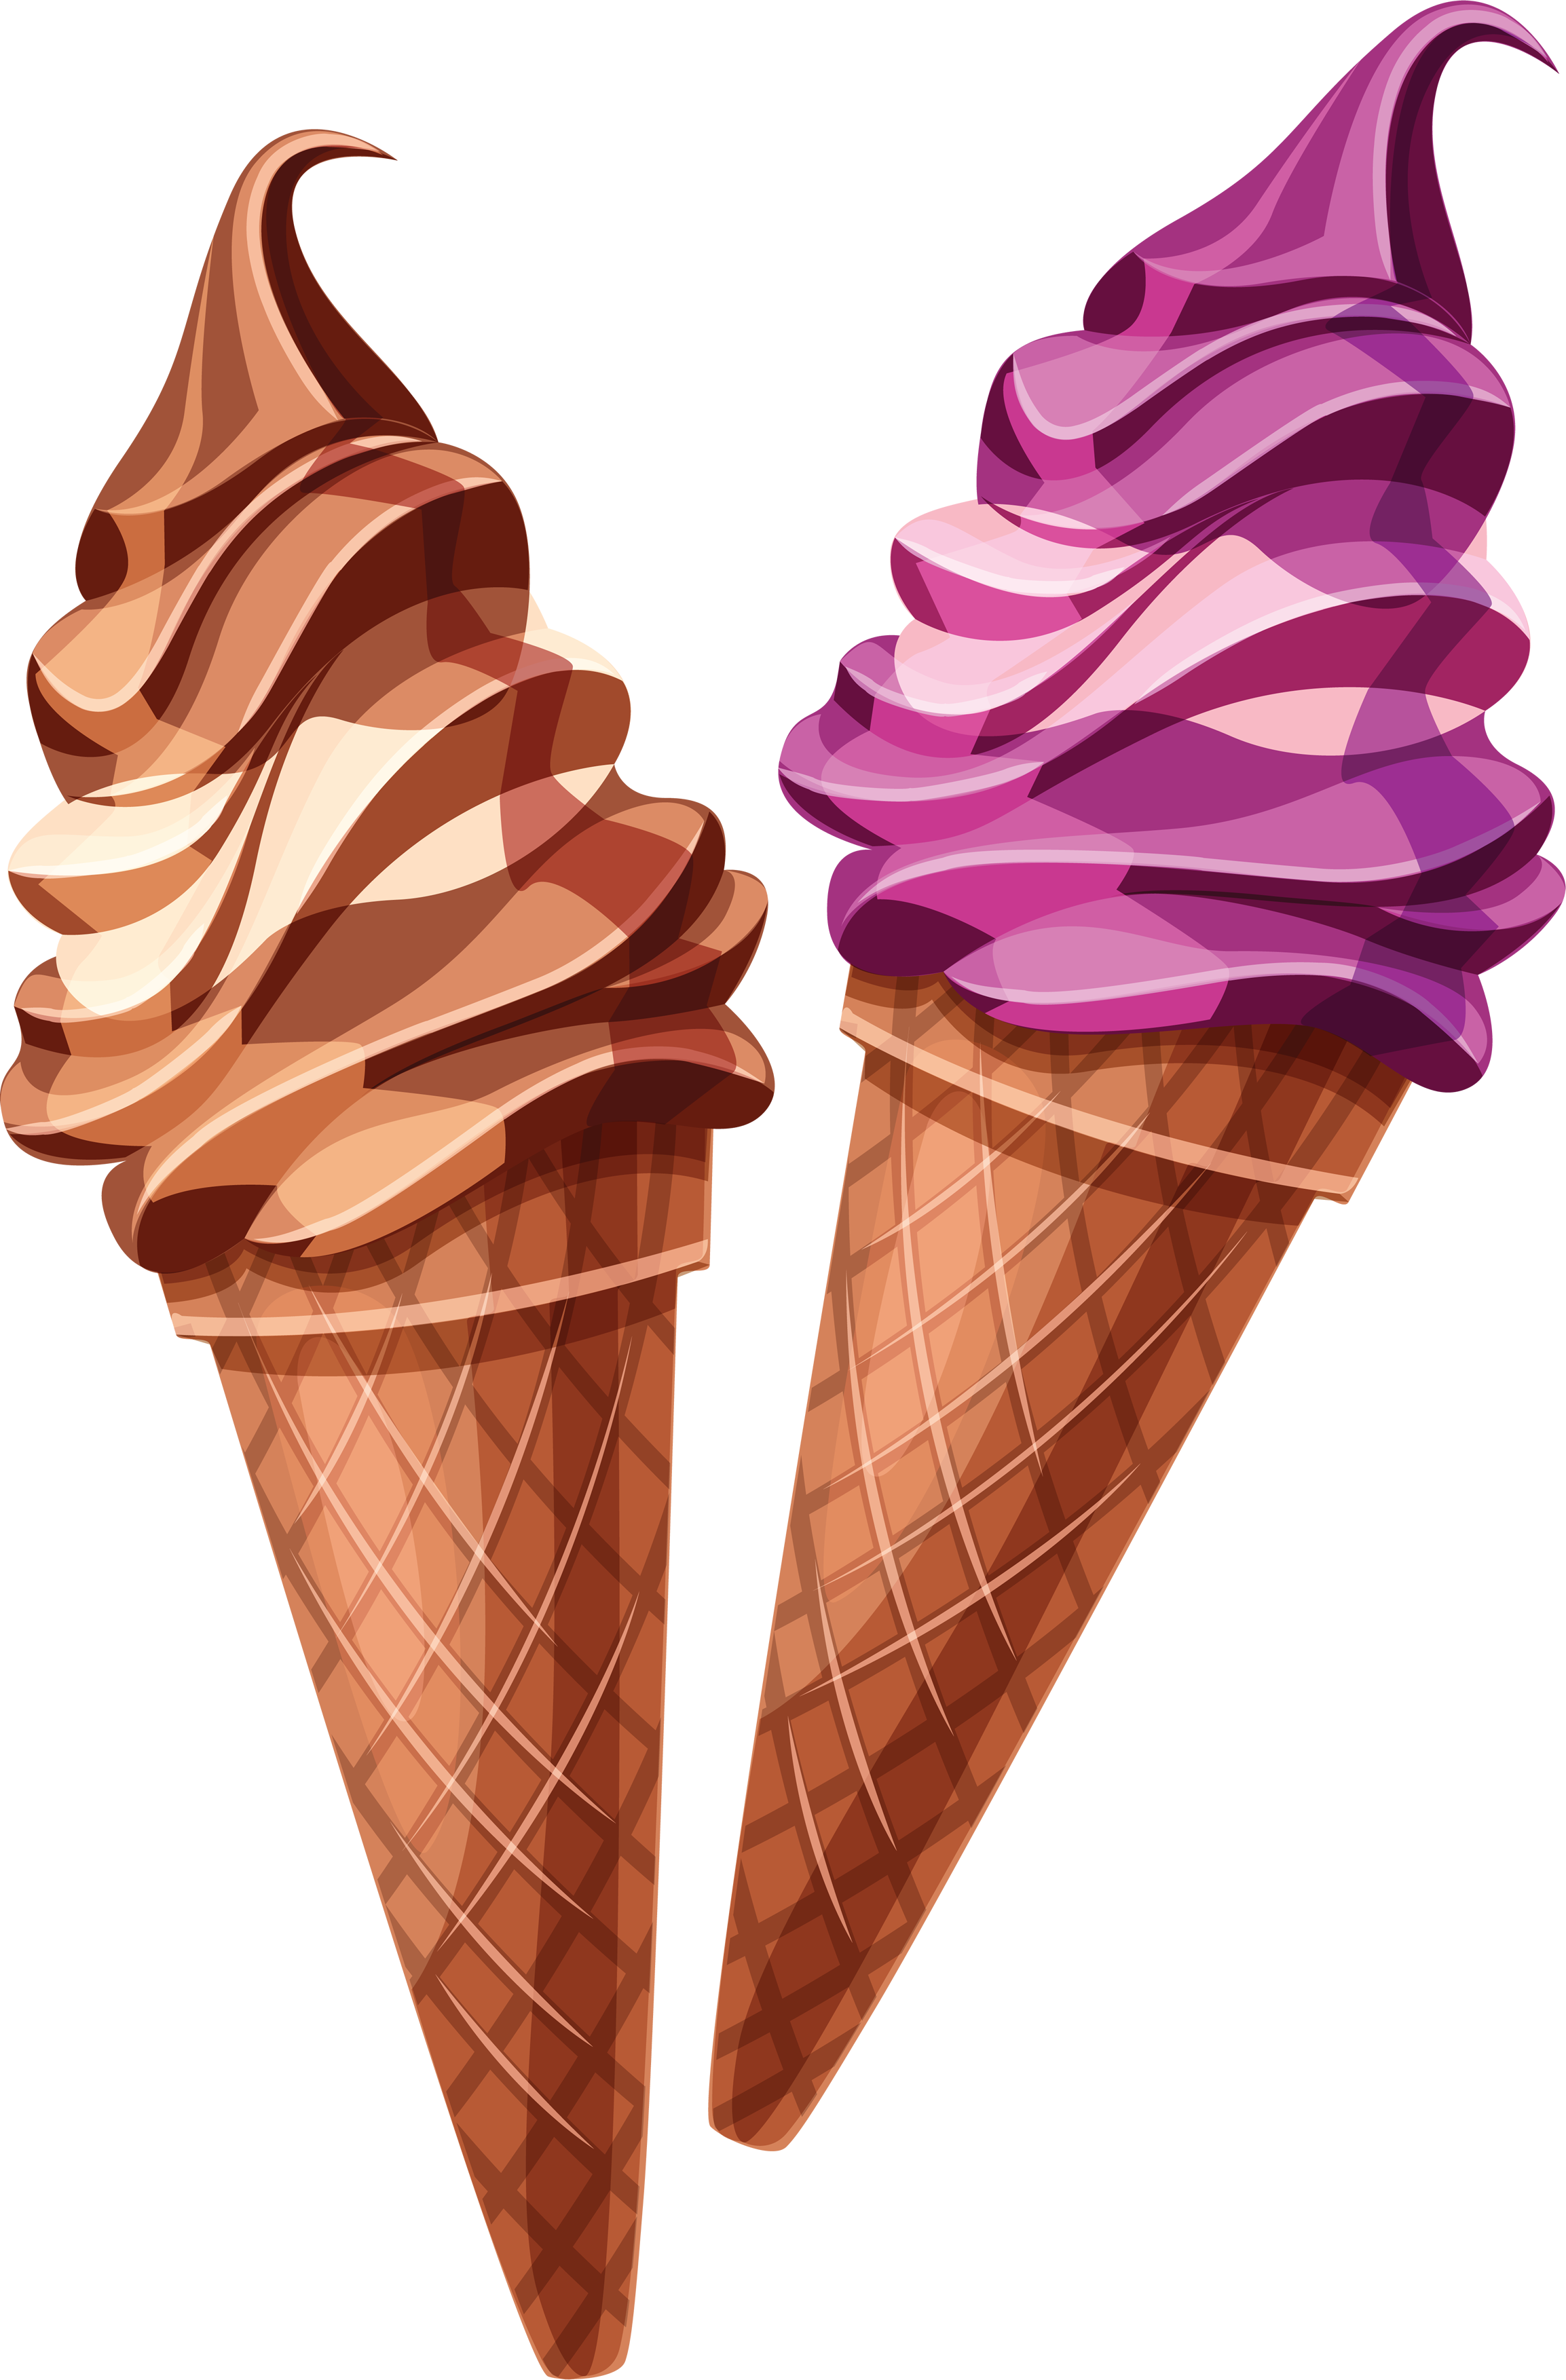 Purple and Brown Ice Cream Cones PNG Image